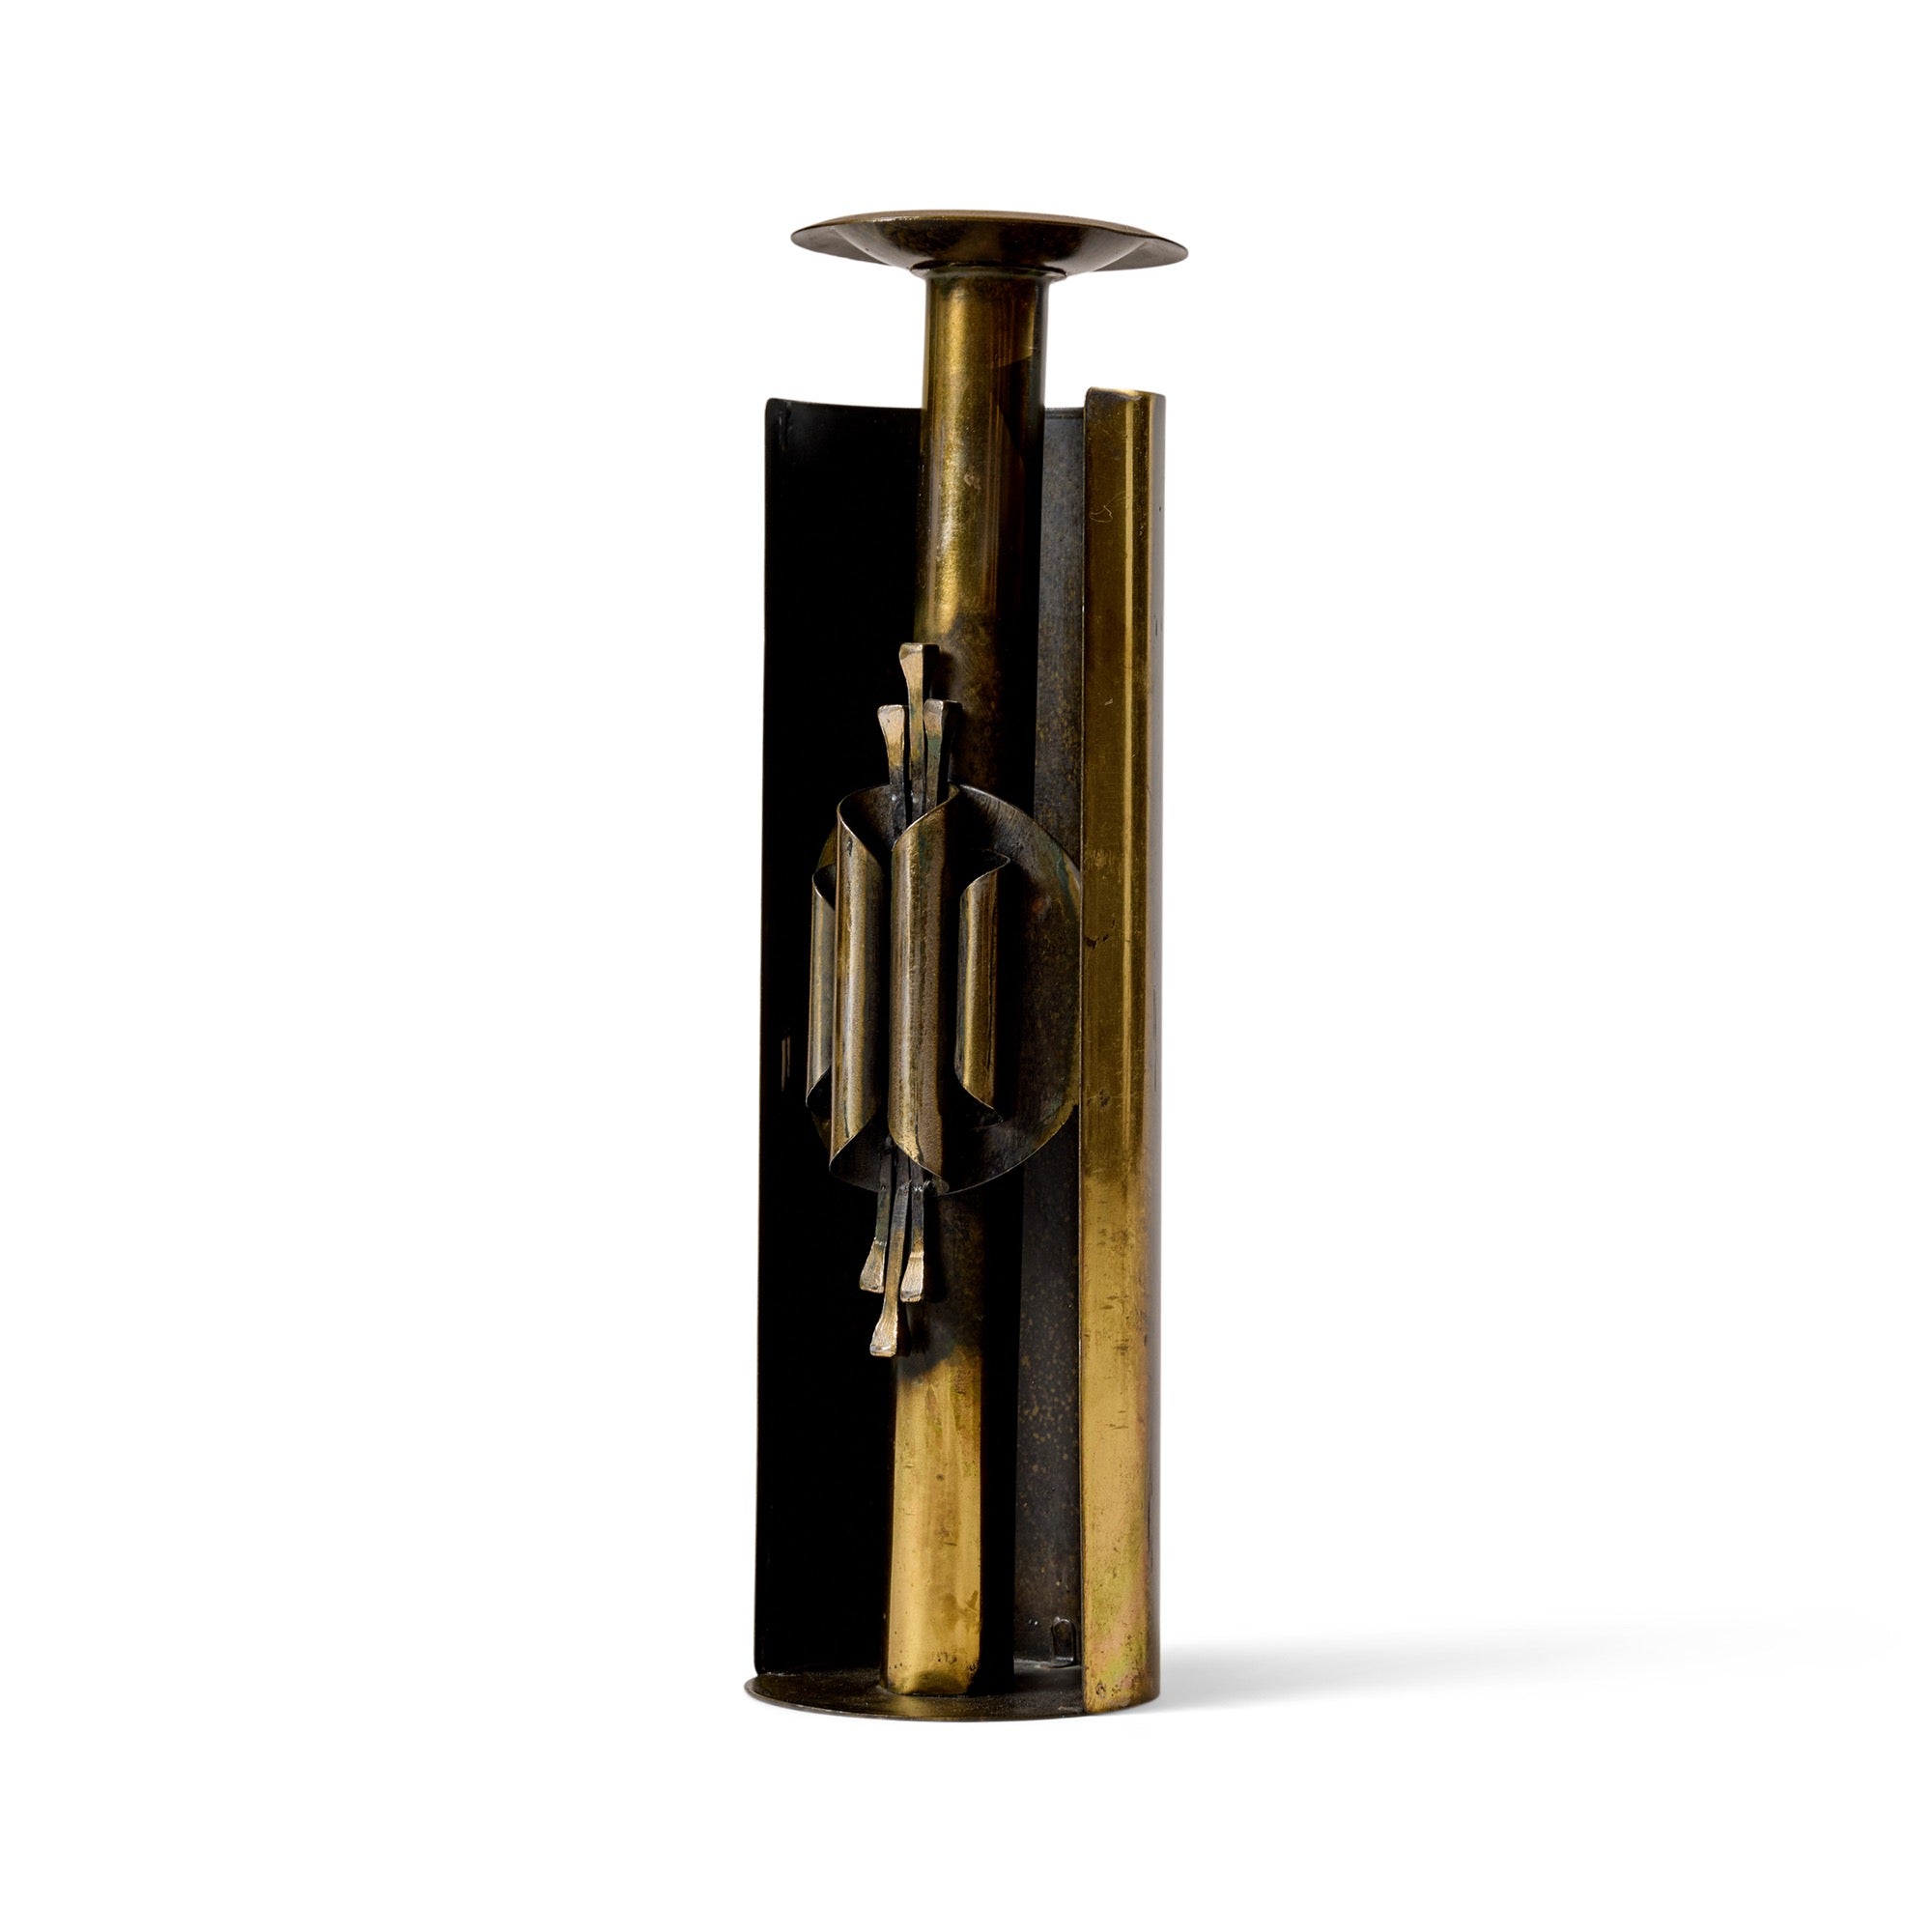 Brutalist Candleholder from Germany, 1960's